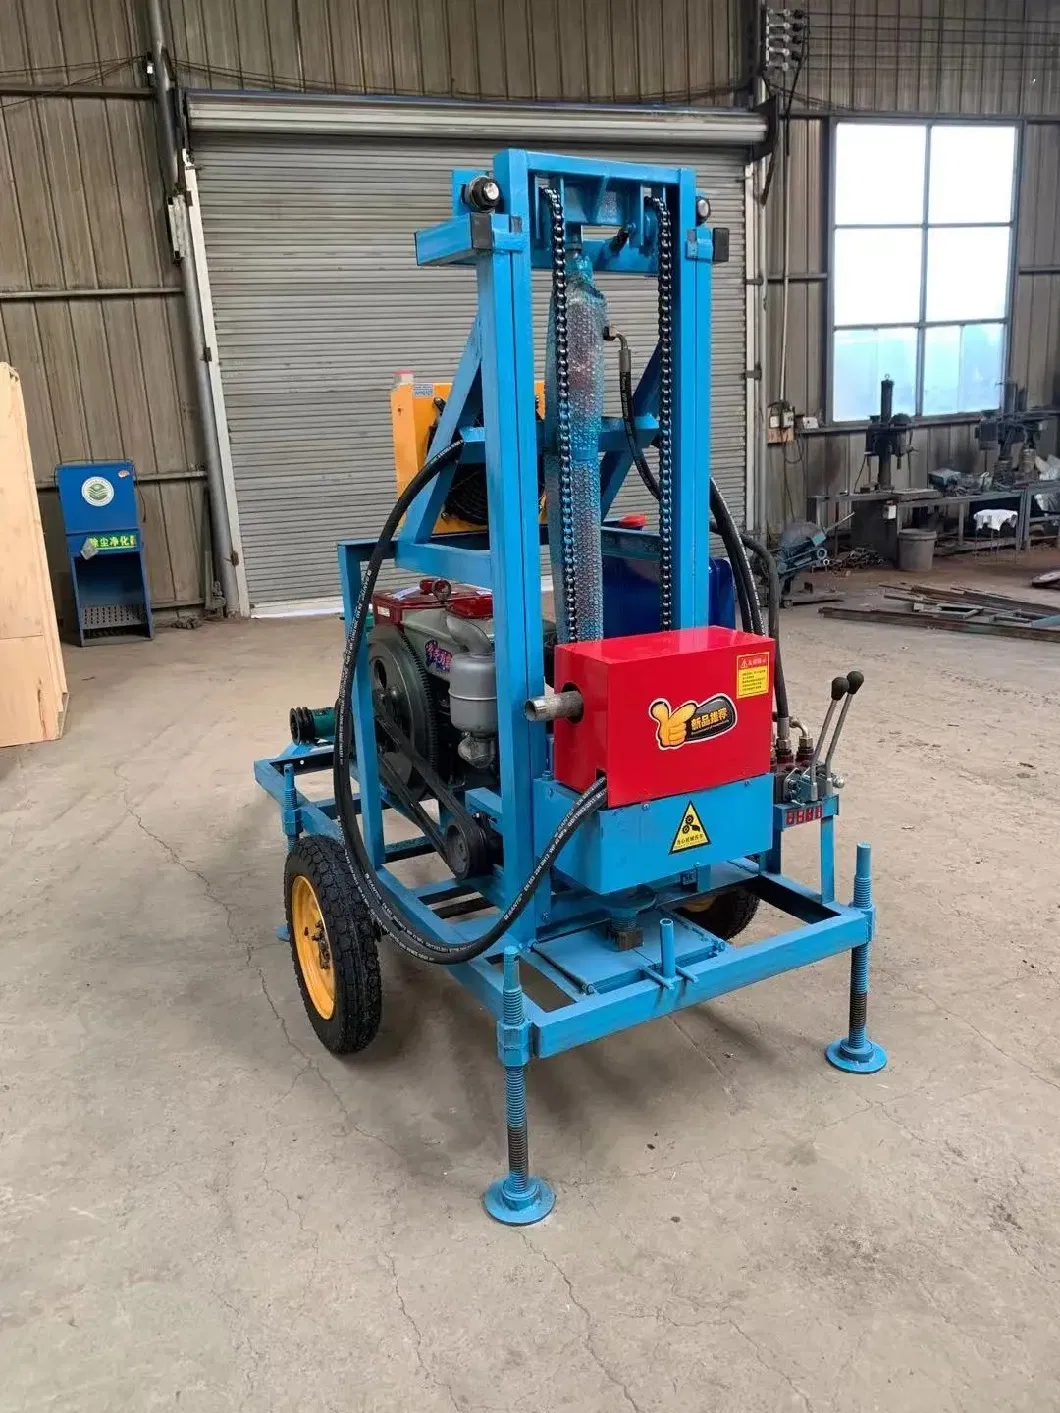 Quick Hydraulic Drilling Machine for African Farms